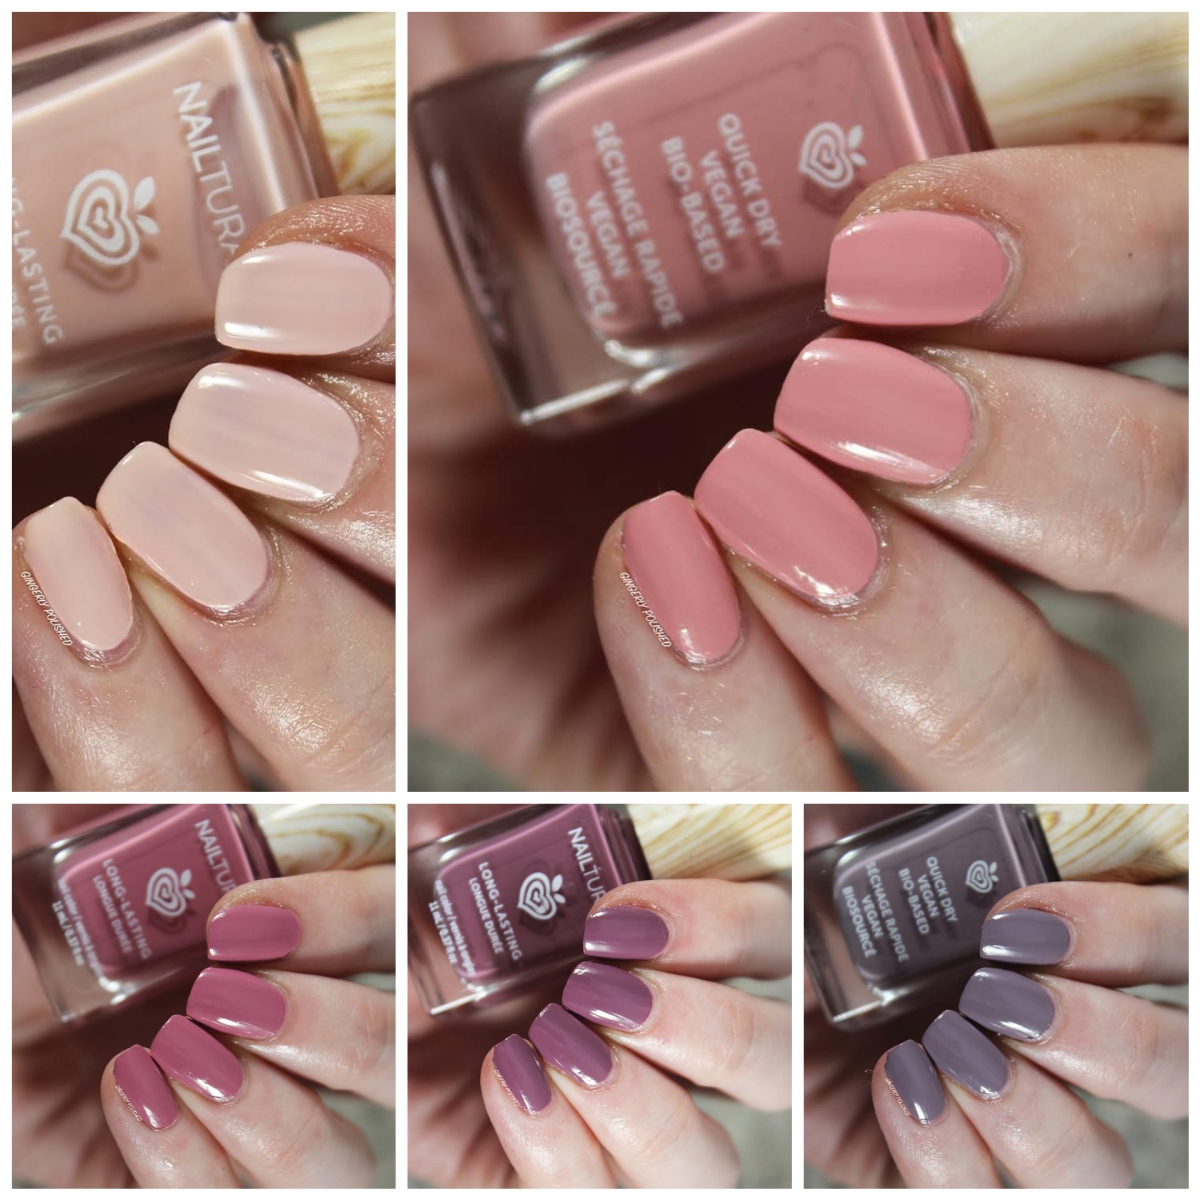 Nailtural Malibu Collection – & POLISHED Swatches – Review GINGERLY